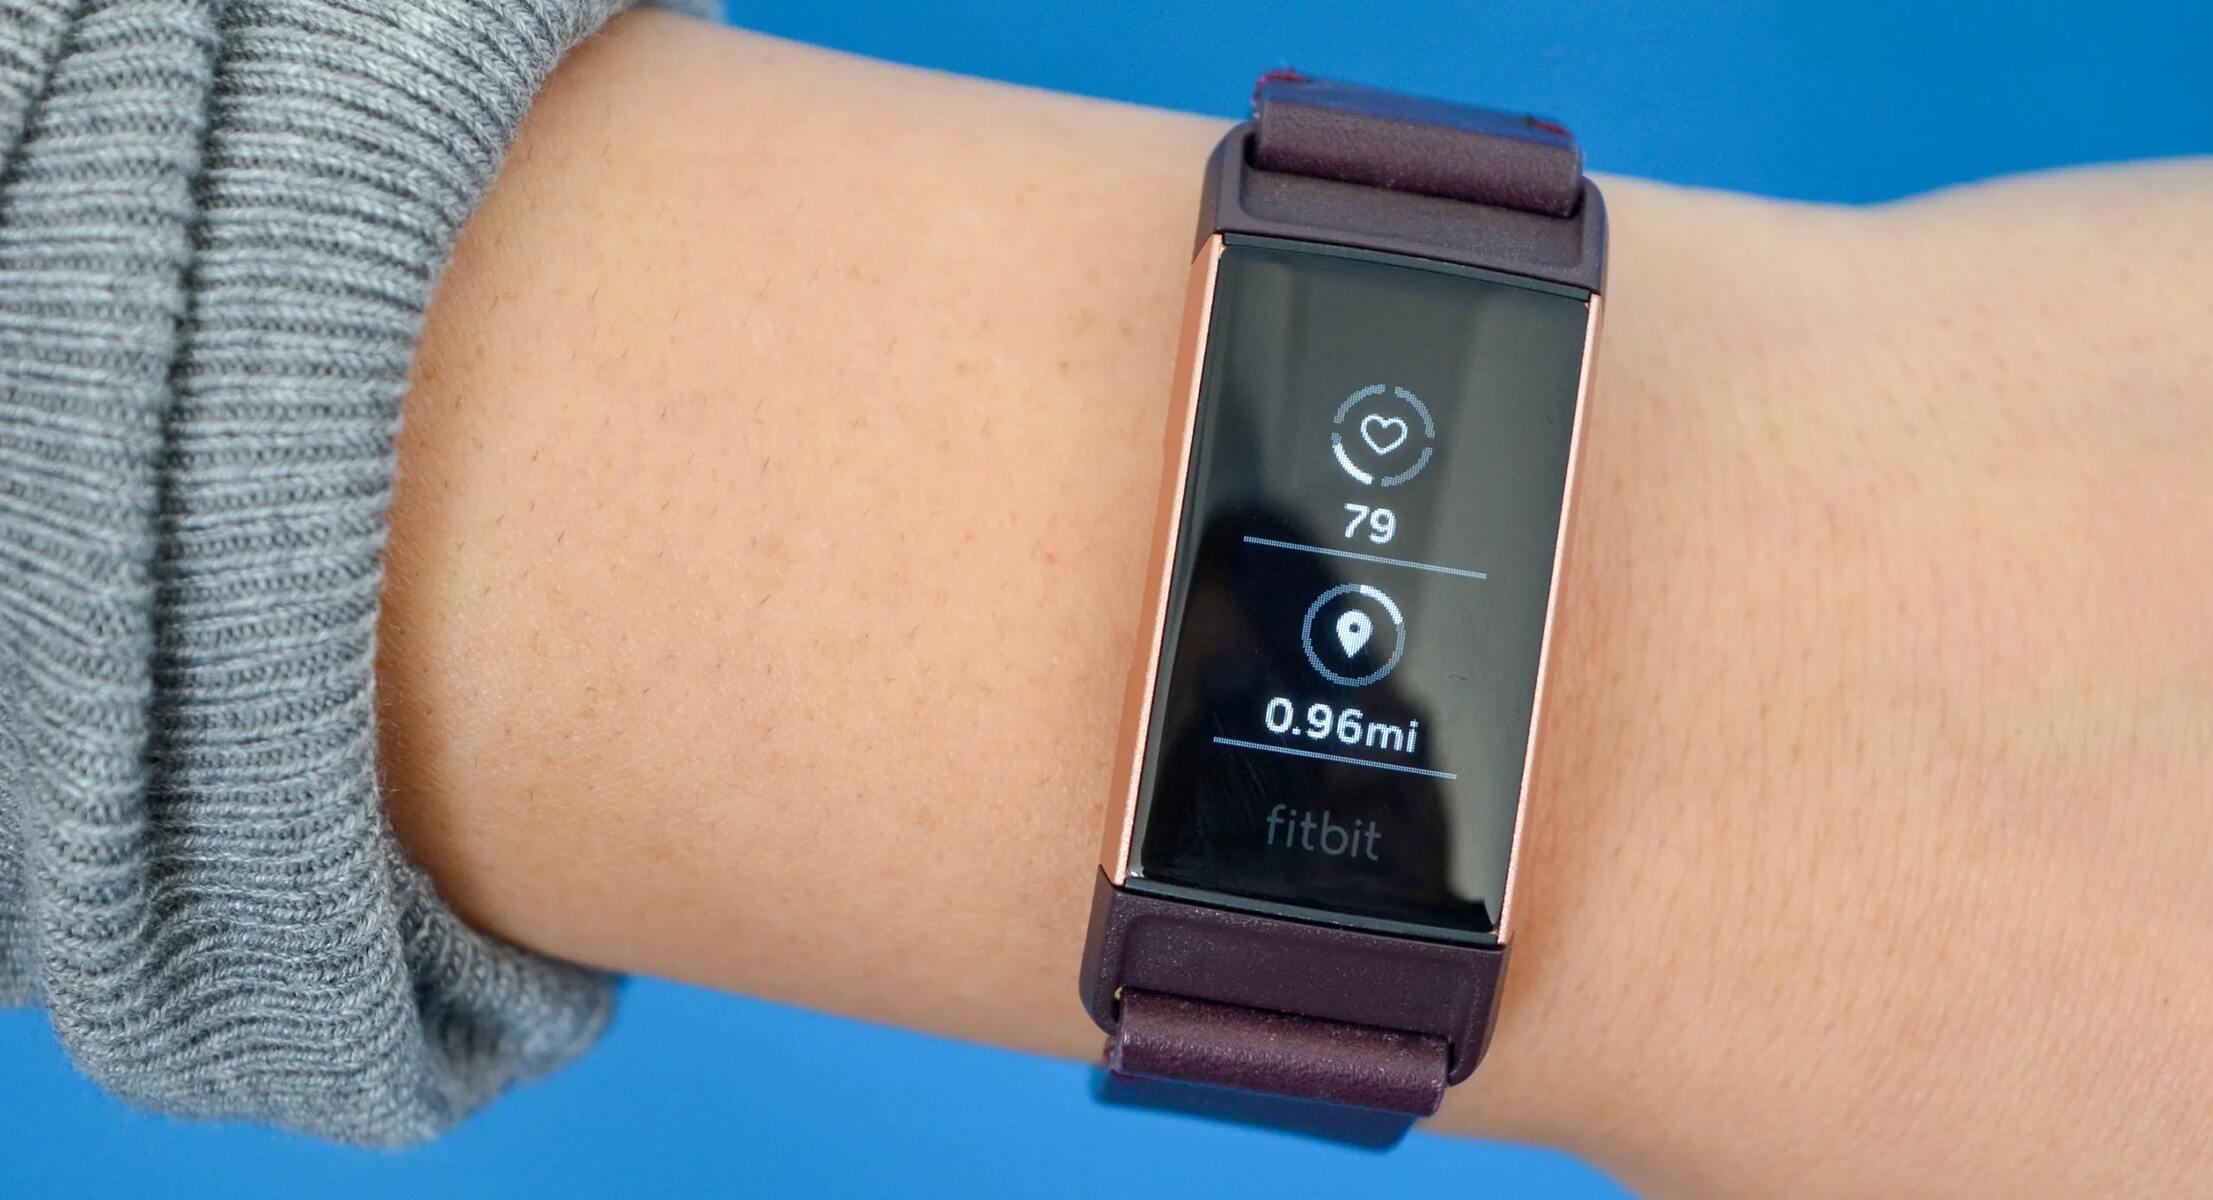 Charging Countdown: Estimating The Time Fitbit Takes To Charge